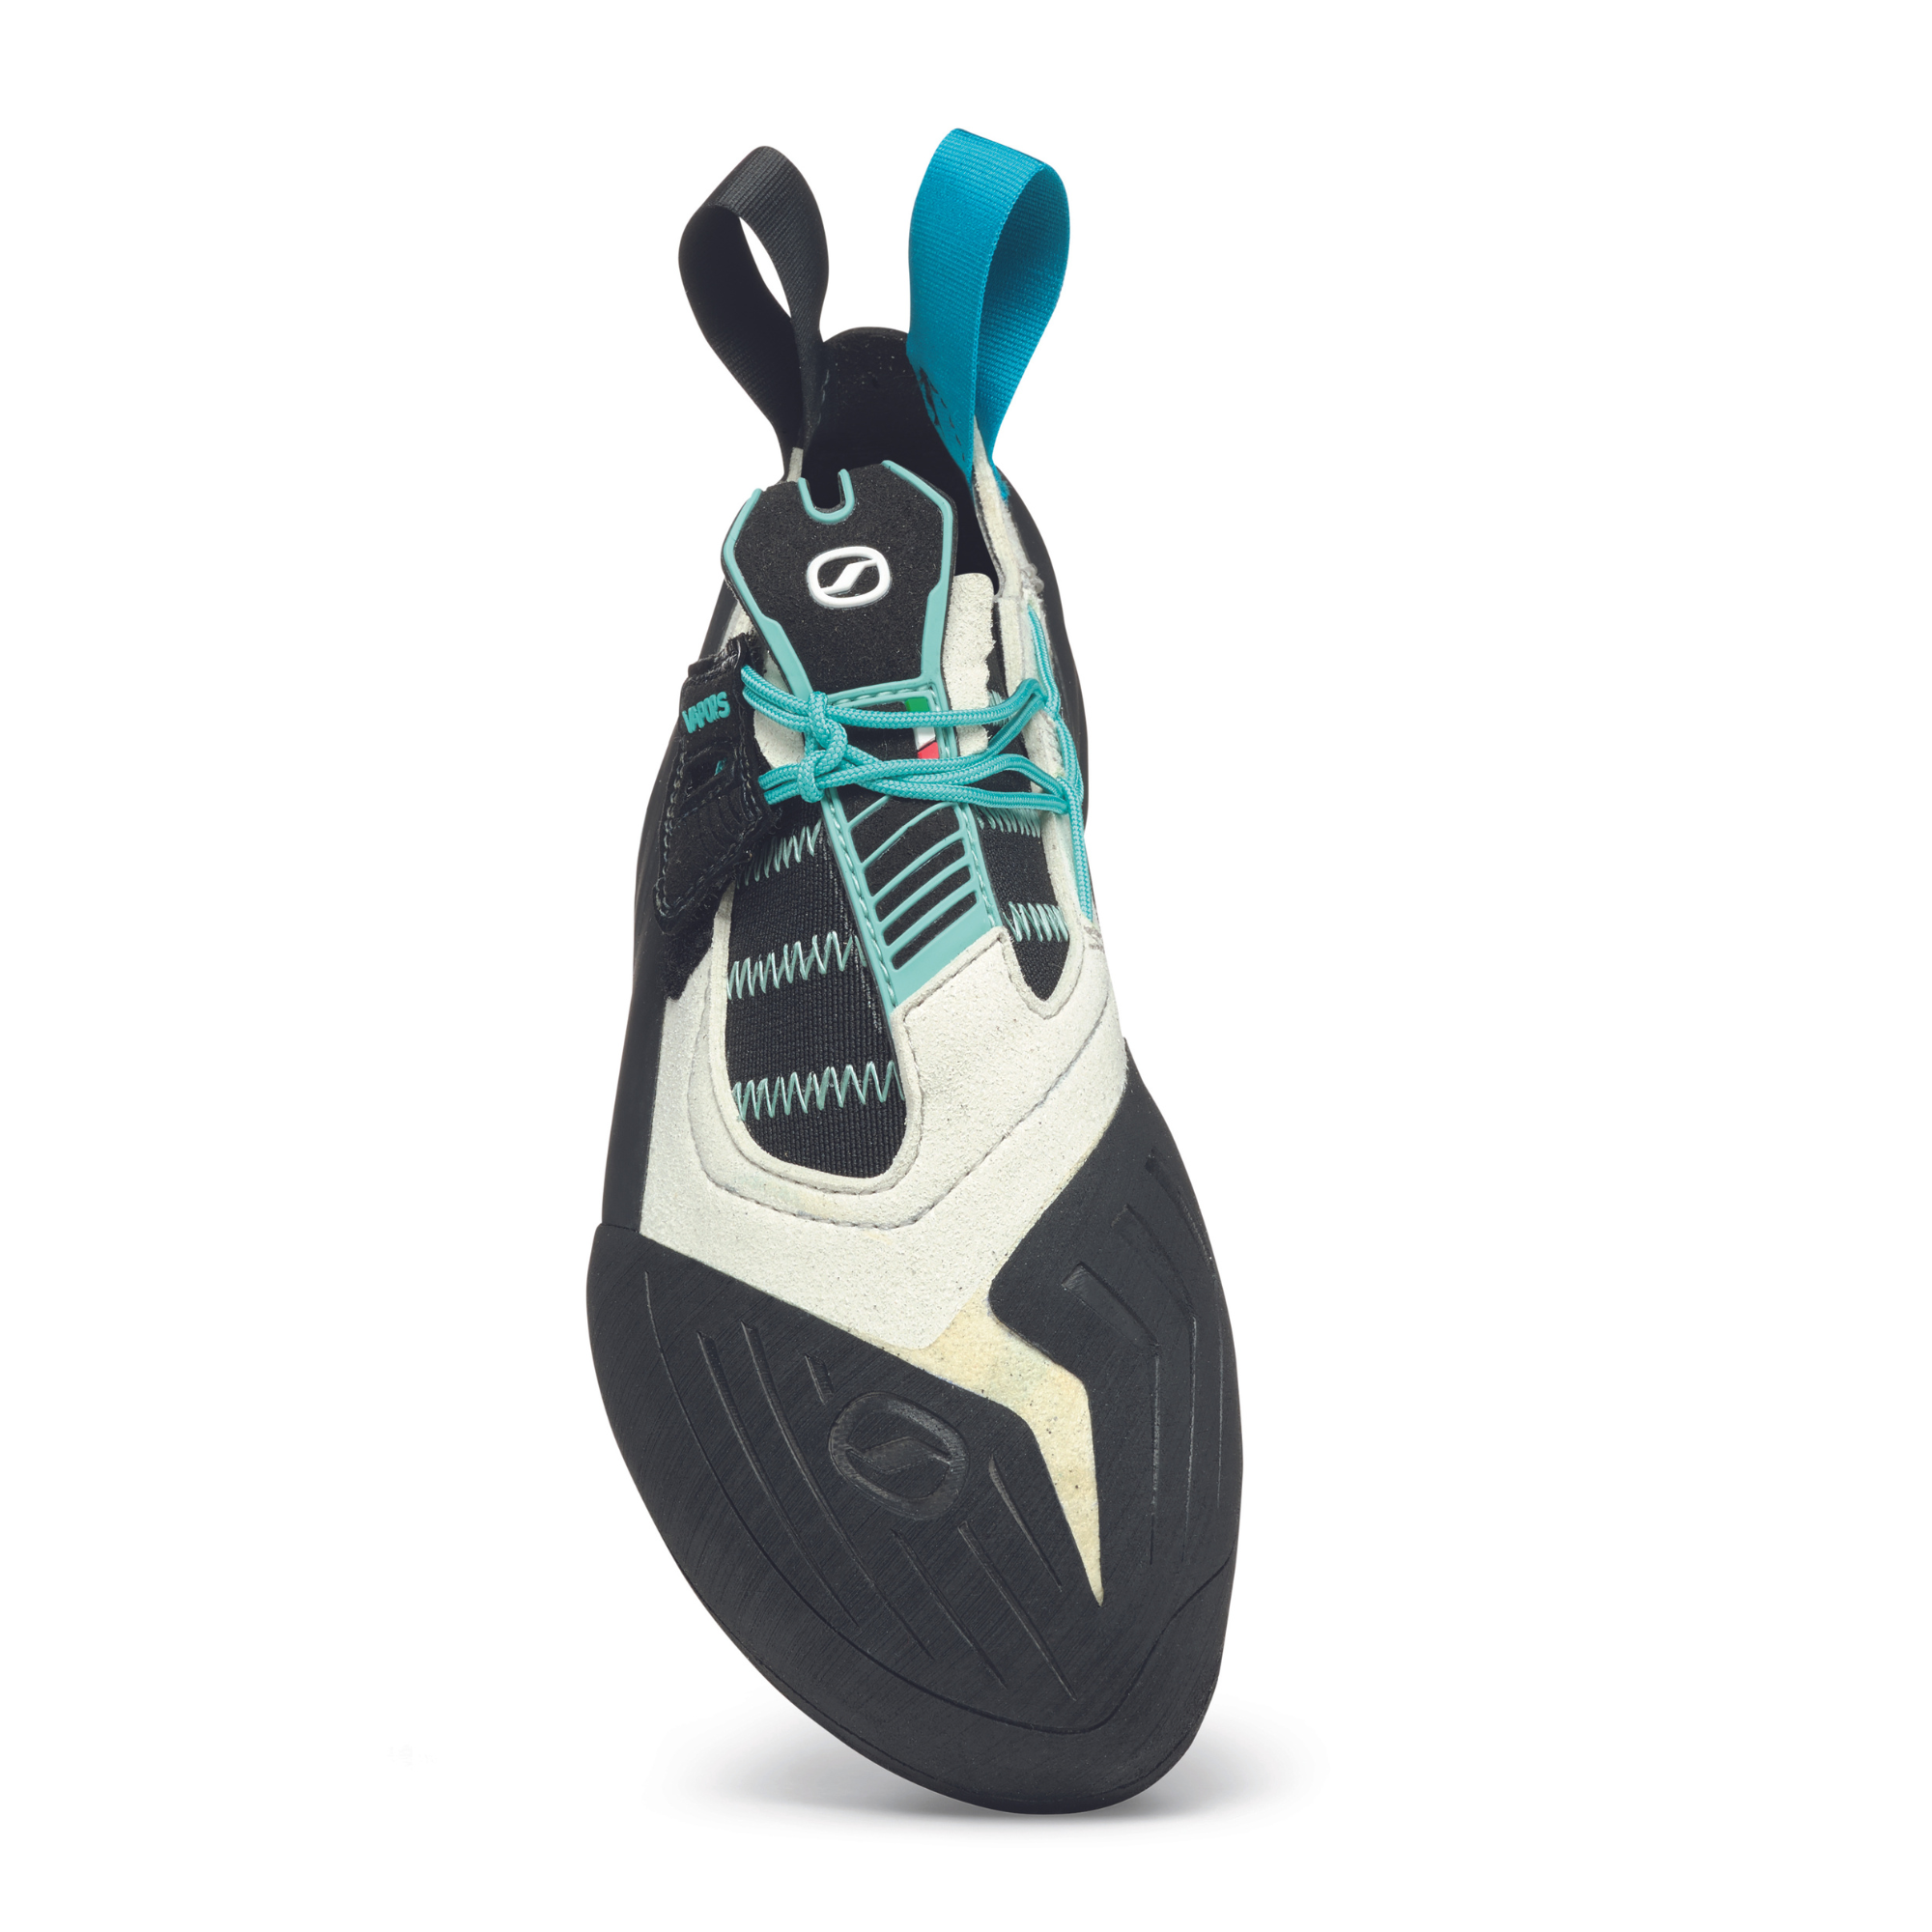 Scarpa Vapour S Womens in Dust Grey-Aqua. Side view showing logo and removable strap